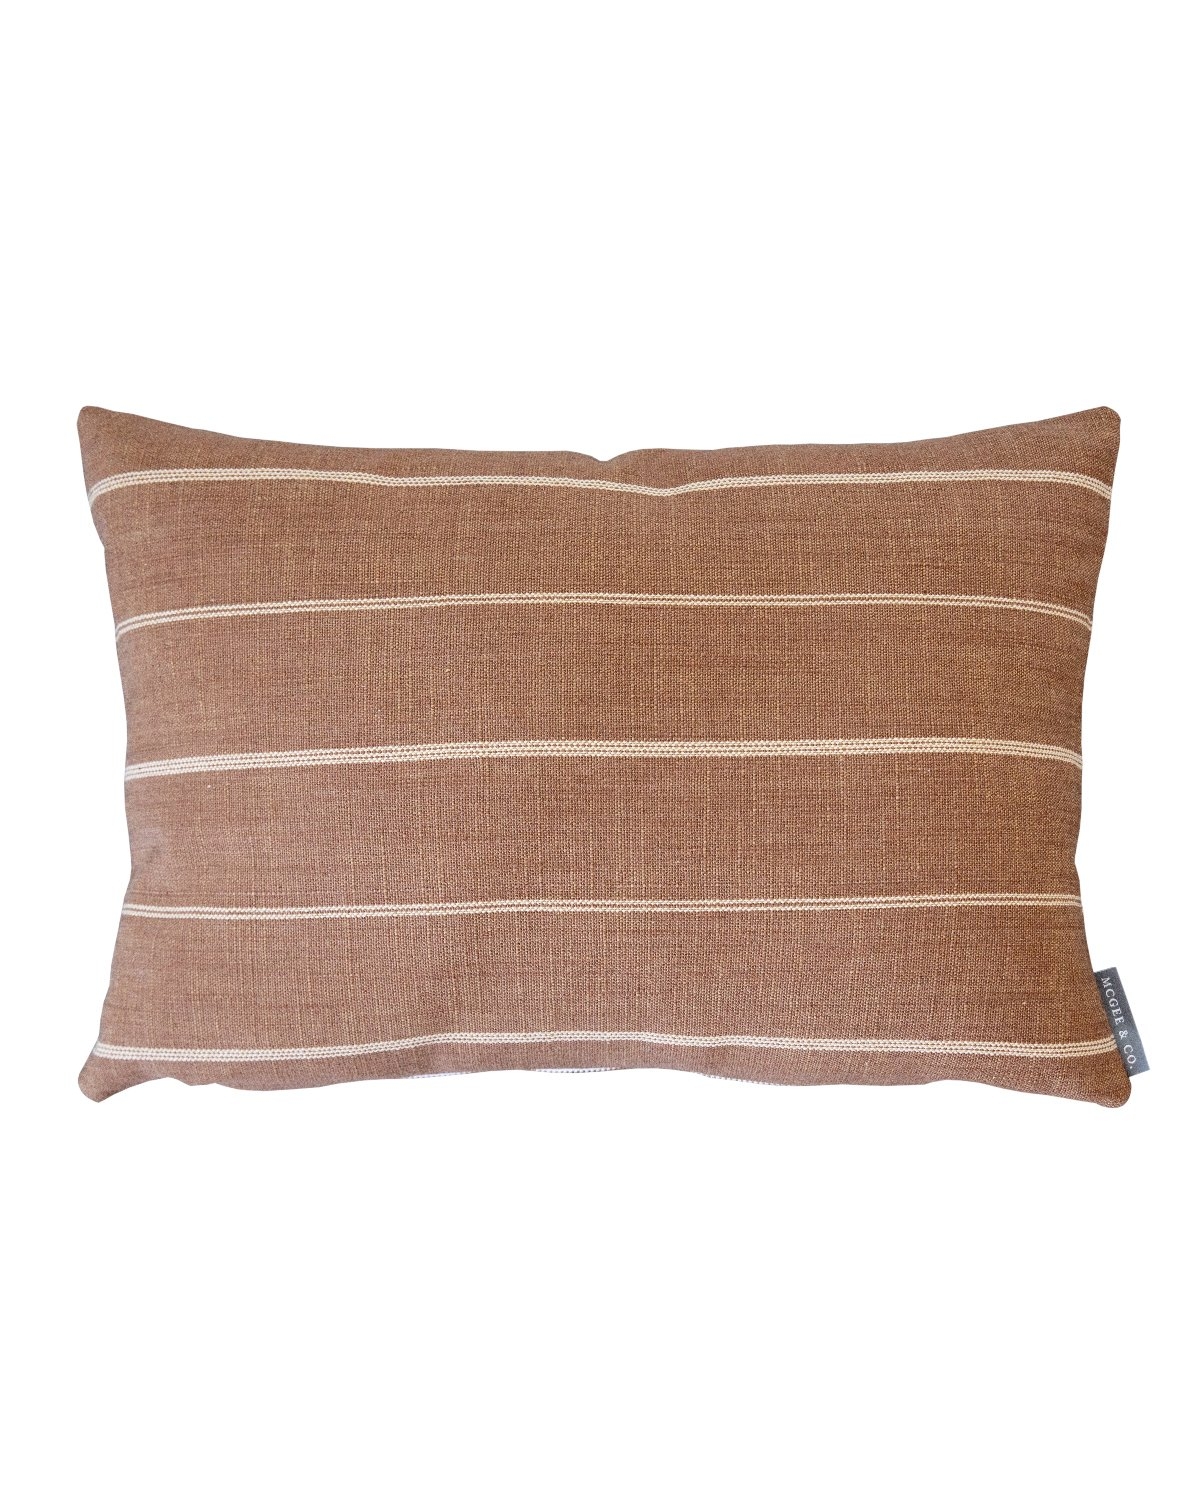 LEOPOLD PILLOW WITHOUT INSERT, 14" x 20" - Image 0